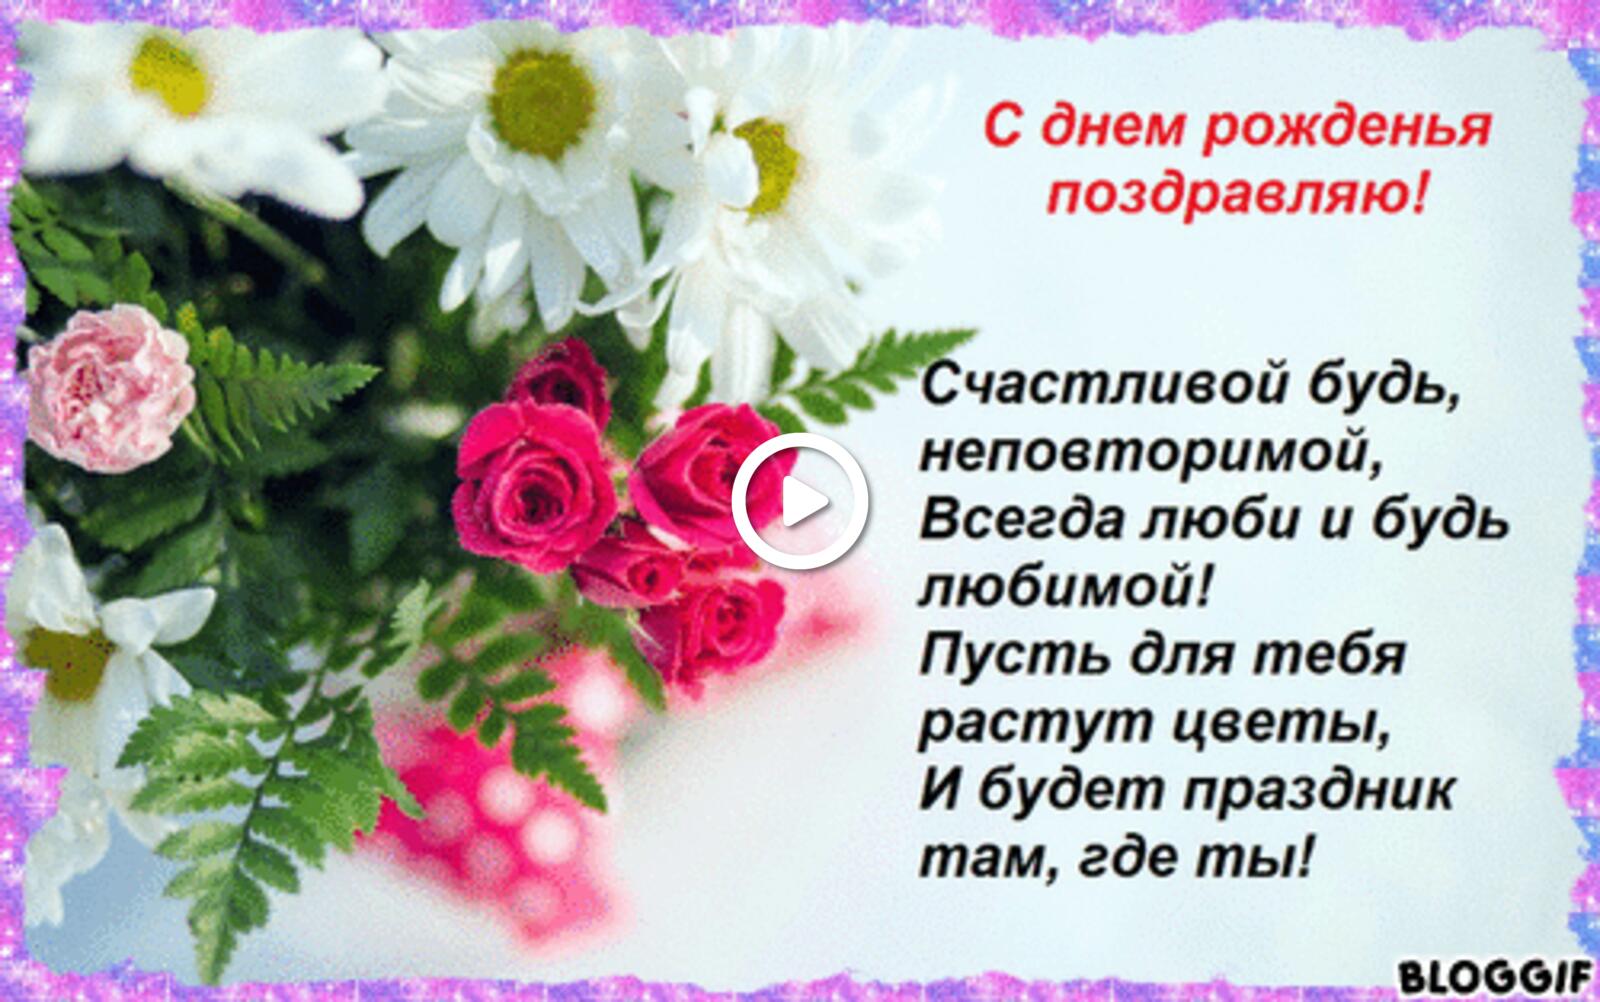 A postcard on the subject of bunch of flowers verse always for free